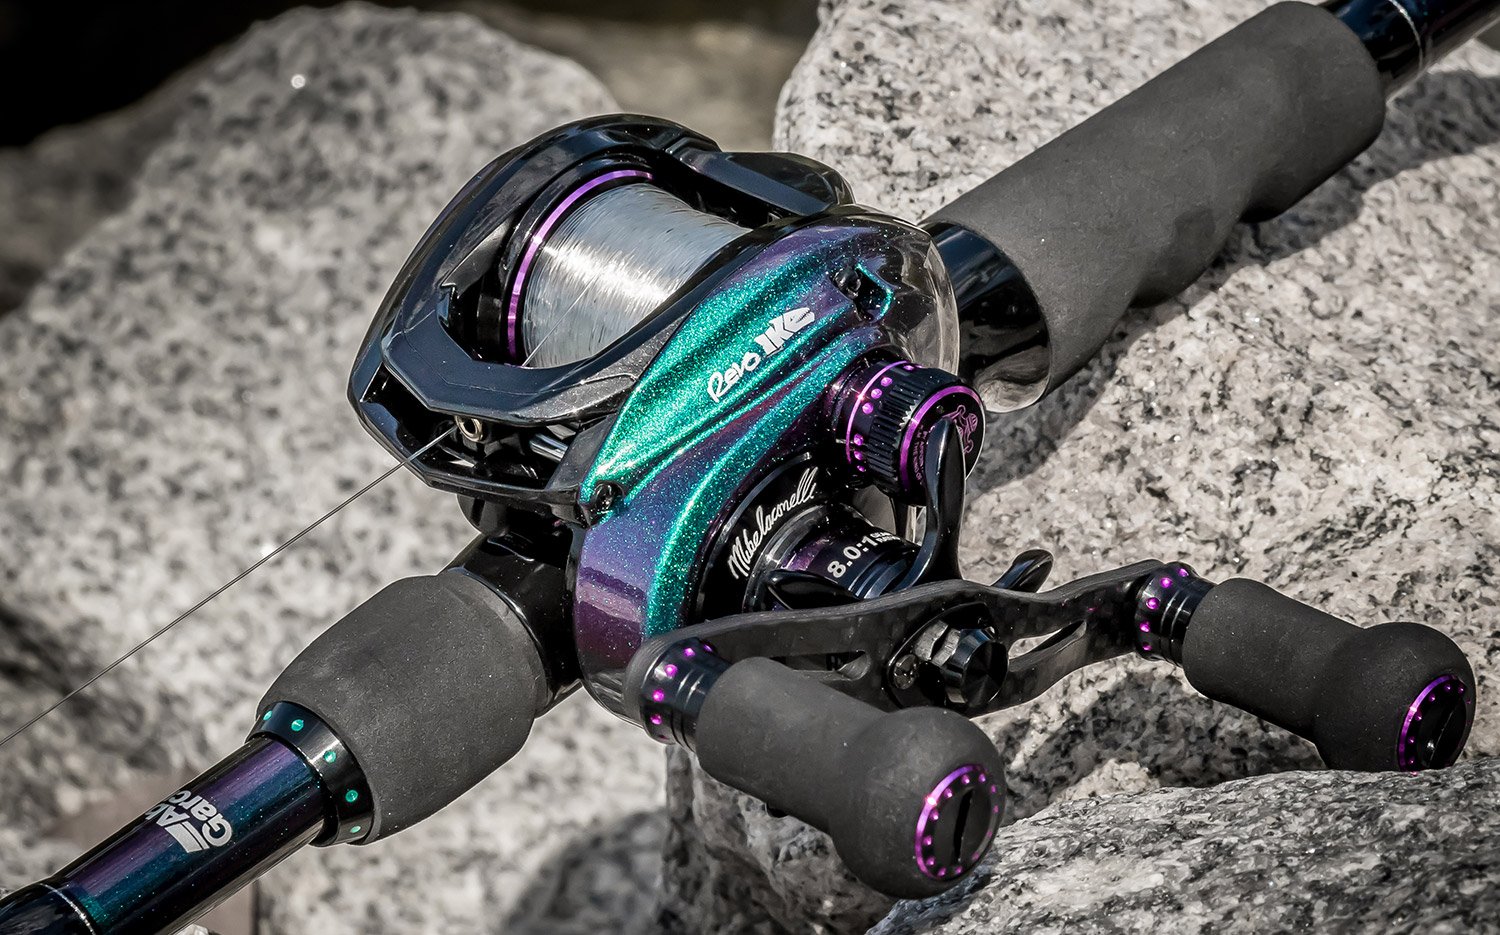 Abu Garcia on X: Shout-out to @mike_Iaconelli for his top 10 finish on  Smith Lake. His setups for success? The Revo Ike Spinning reel + Ike  Signature Finesse rod & Revo Ike